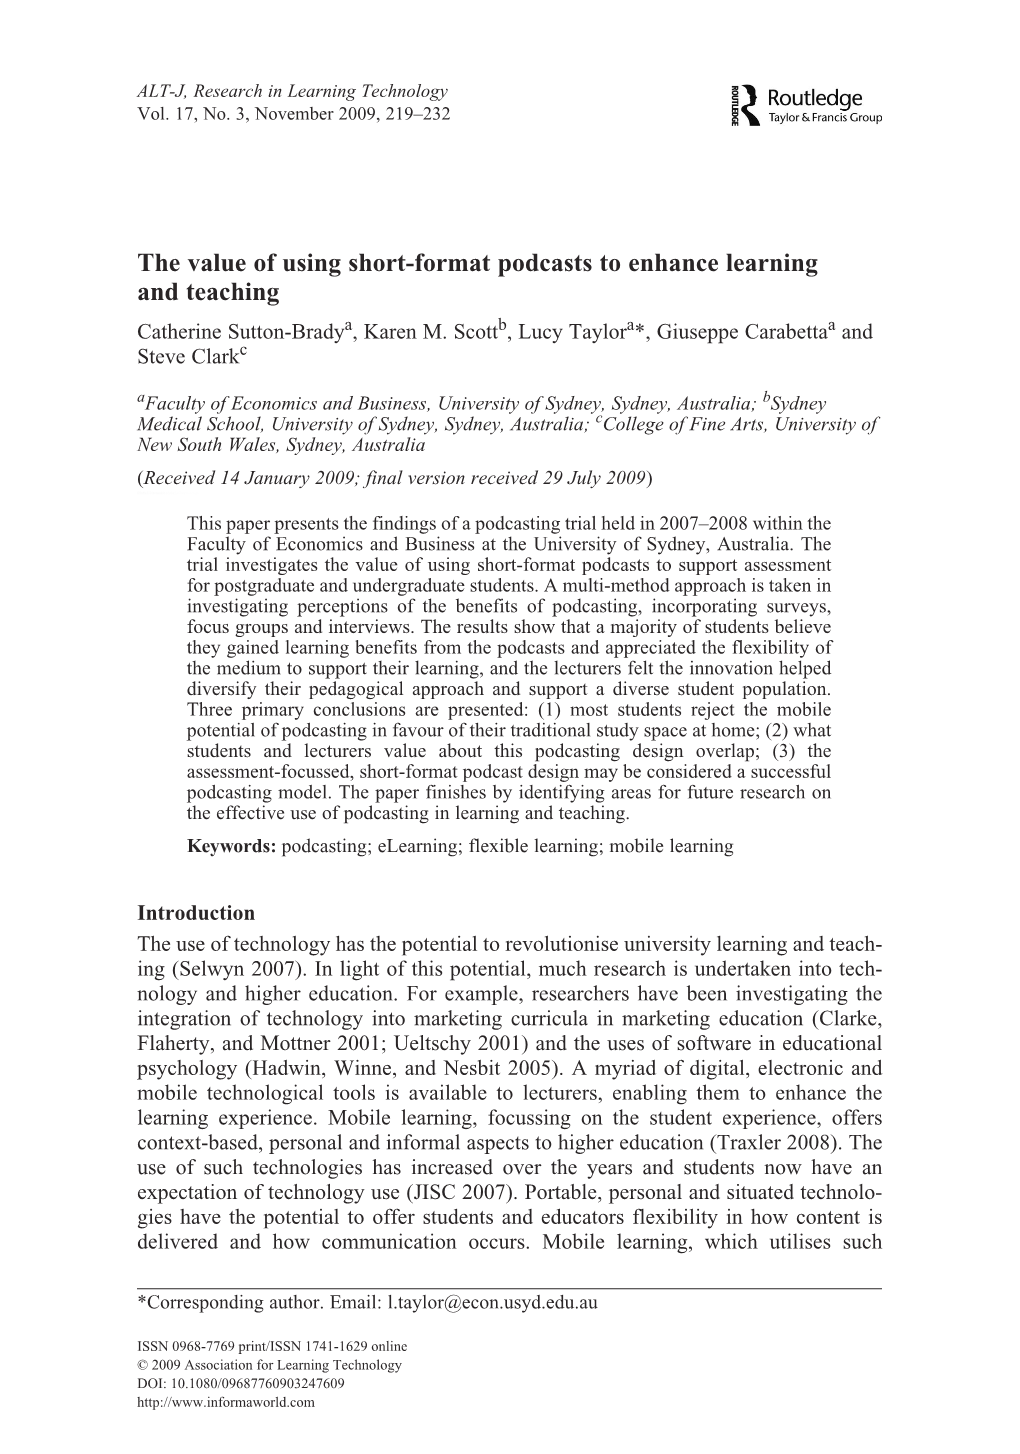 The Value of Using Short-Format Podcasts to Enhance Learning and Teaching Catherine Sutton-Bradya, Karen M